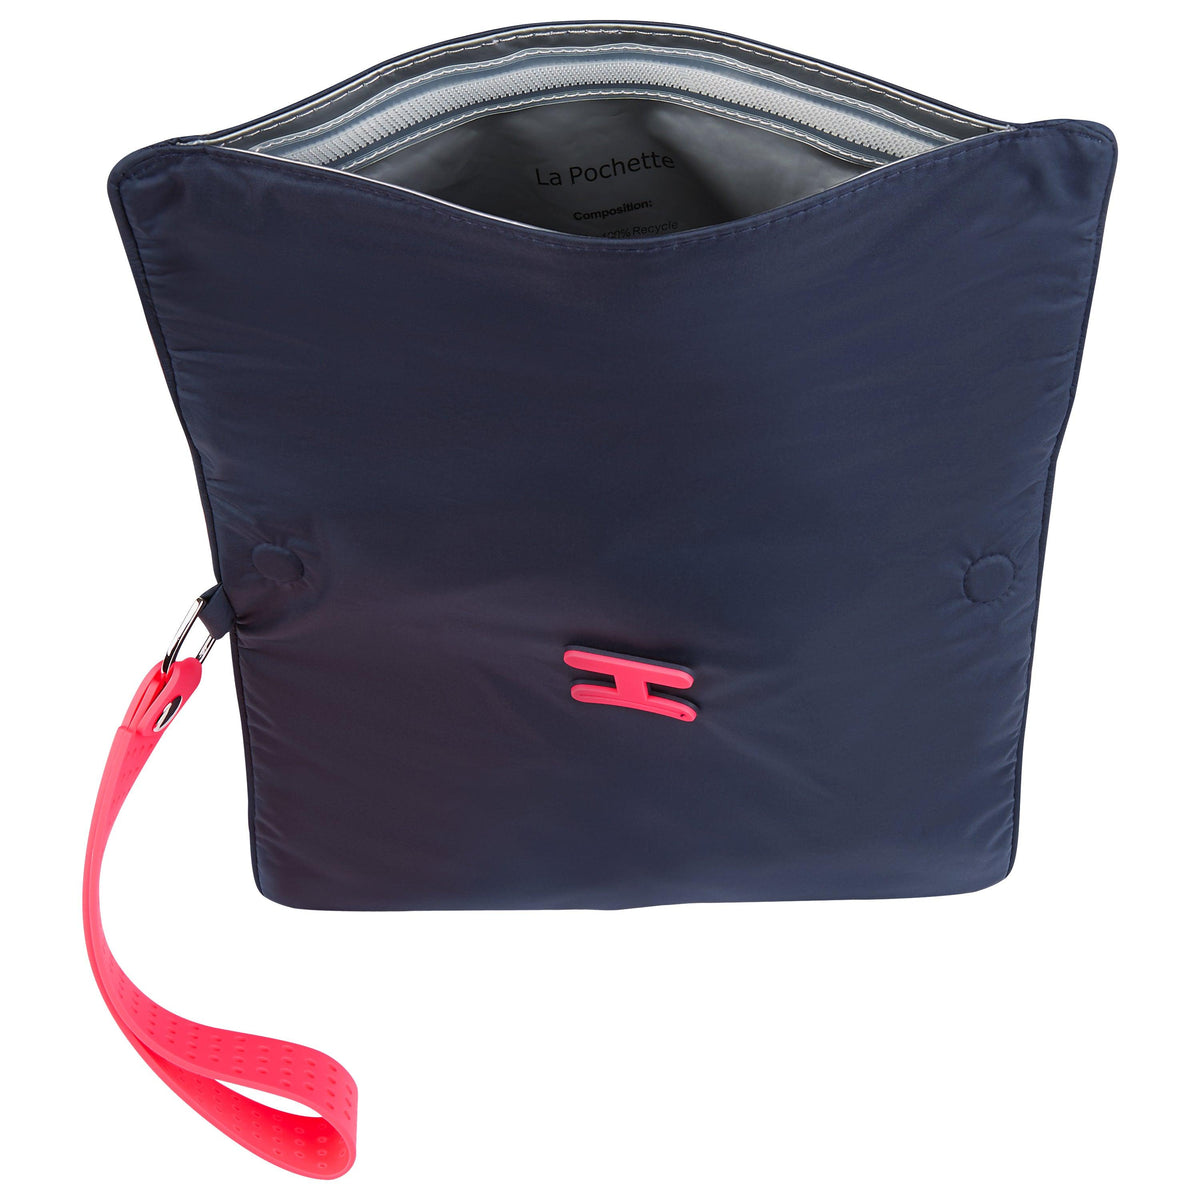 Small wet bag in Midnight Neon Pink open, and showing waterproof lining 